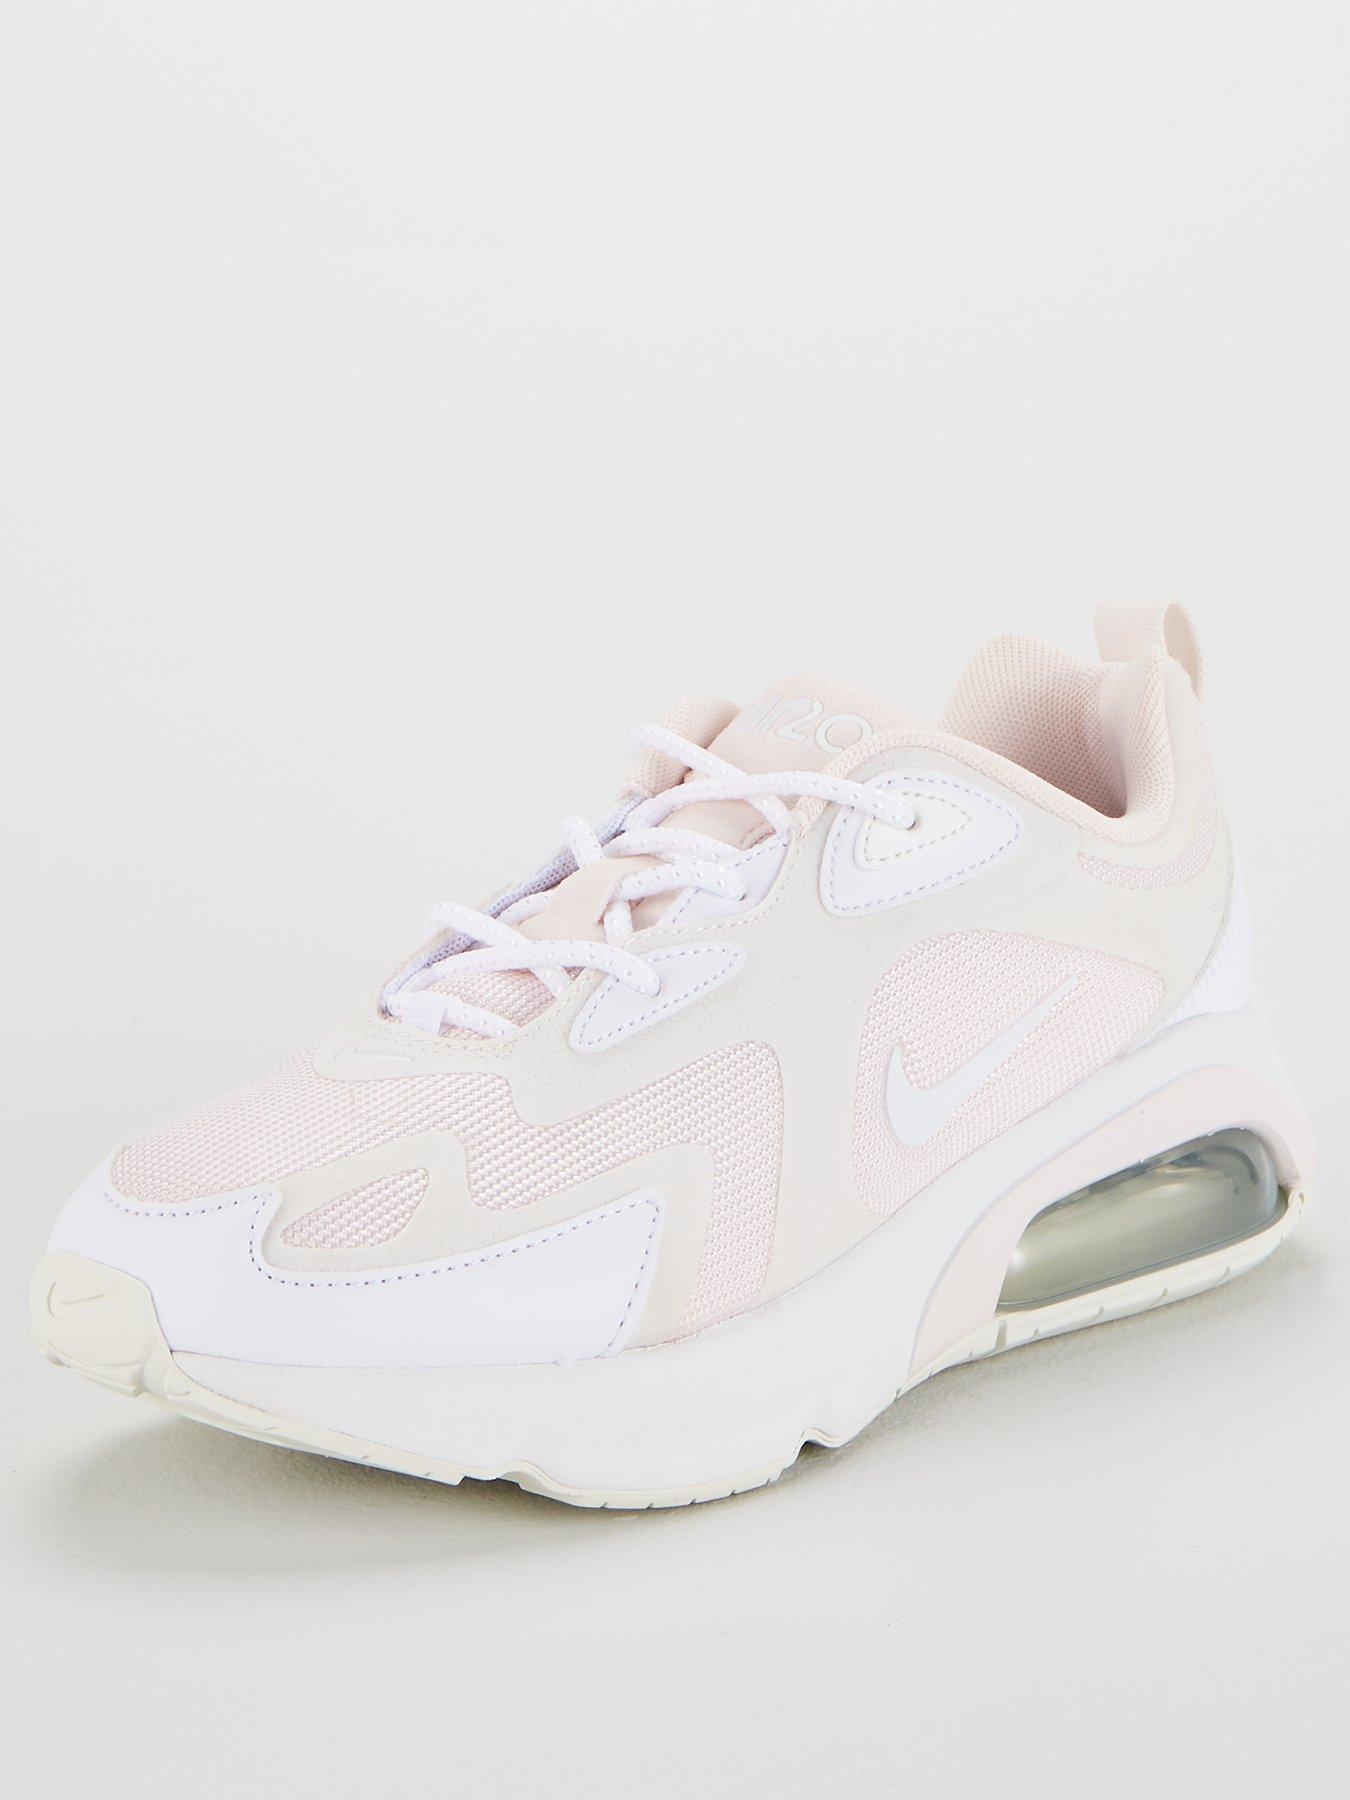 nike trainers white and pink